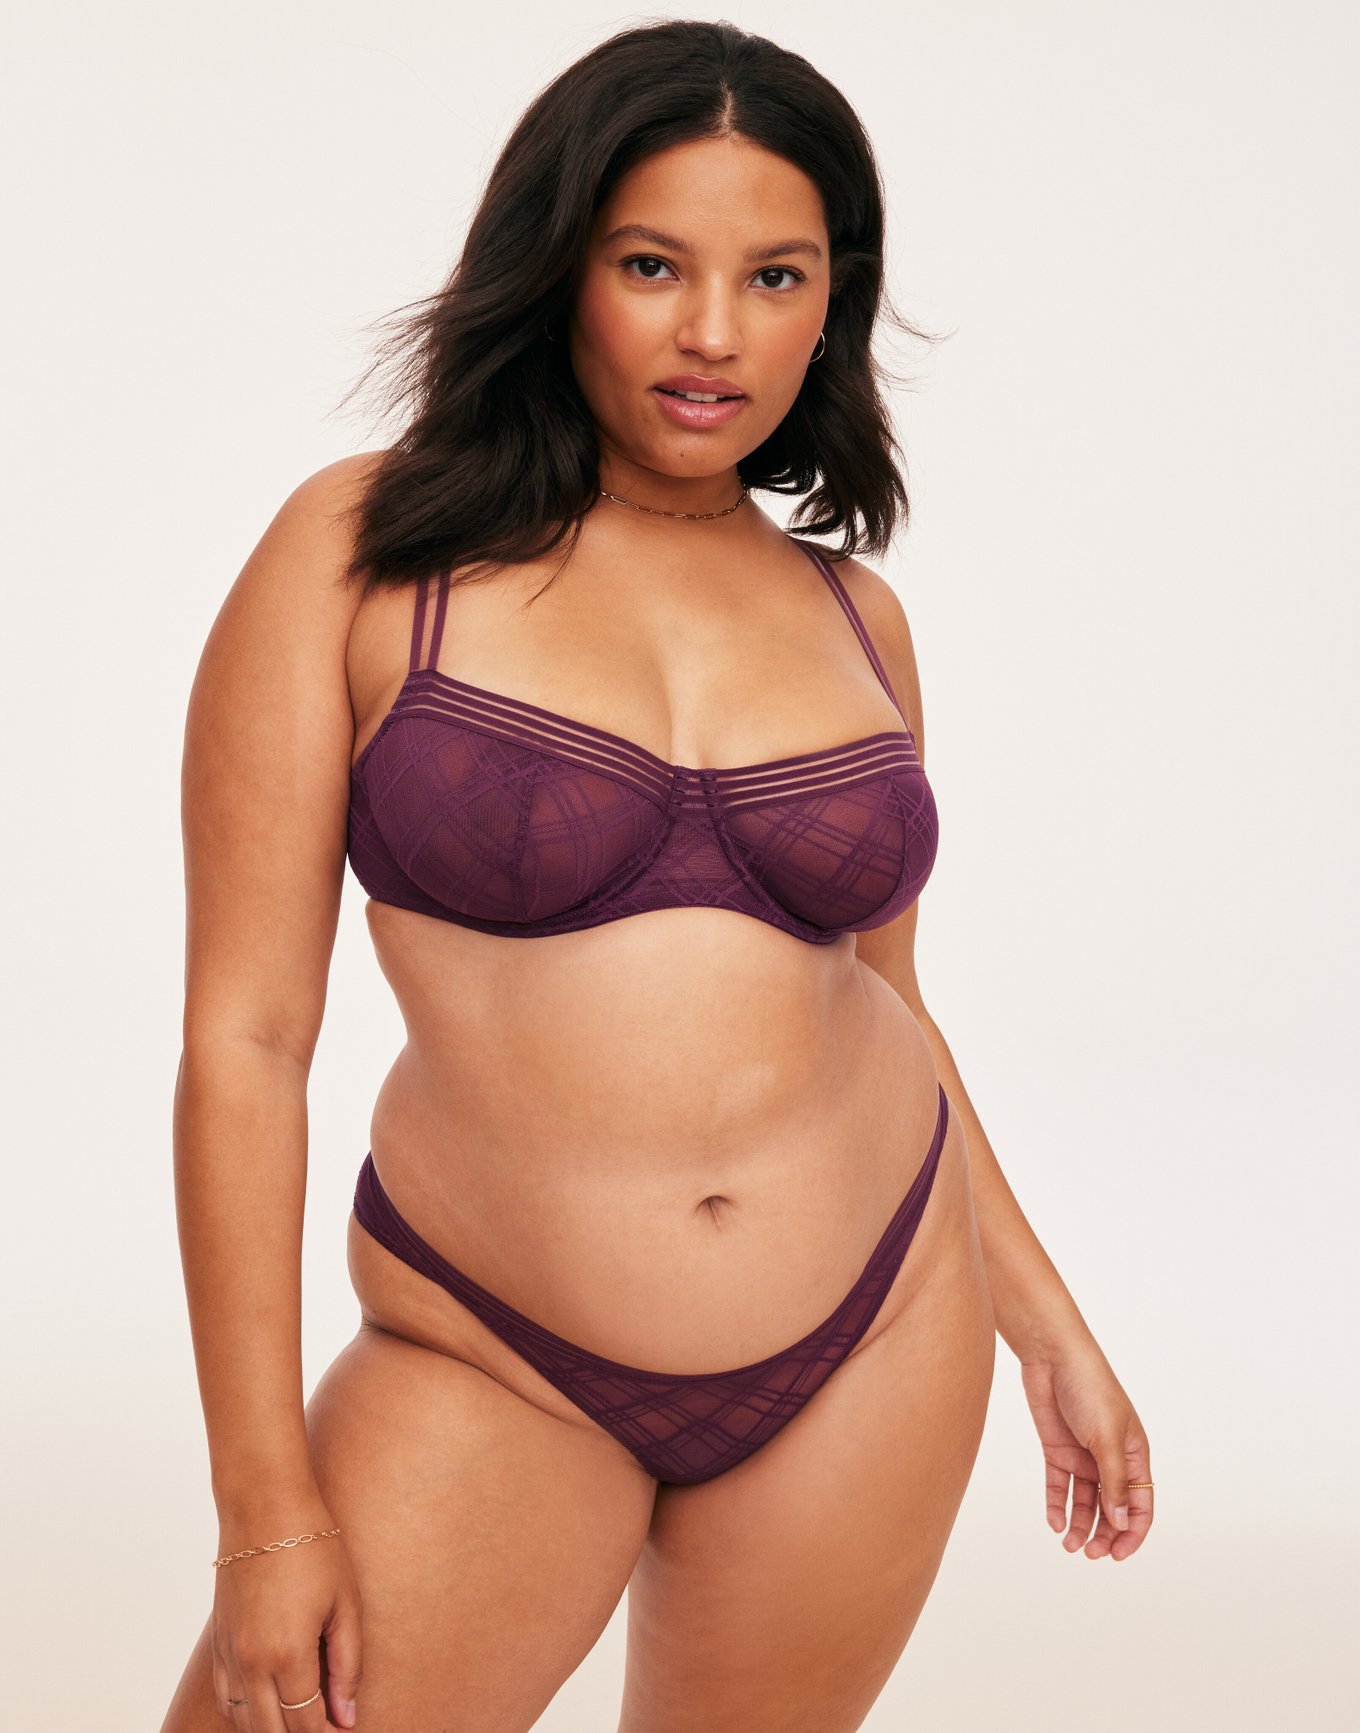 Plus Size VIP Wine Lace Sexy Strappy Teddy - Spicy Lingerie